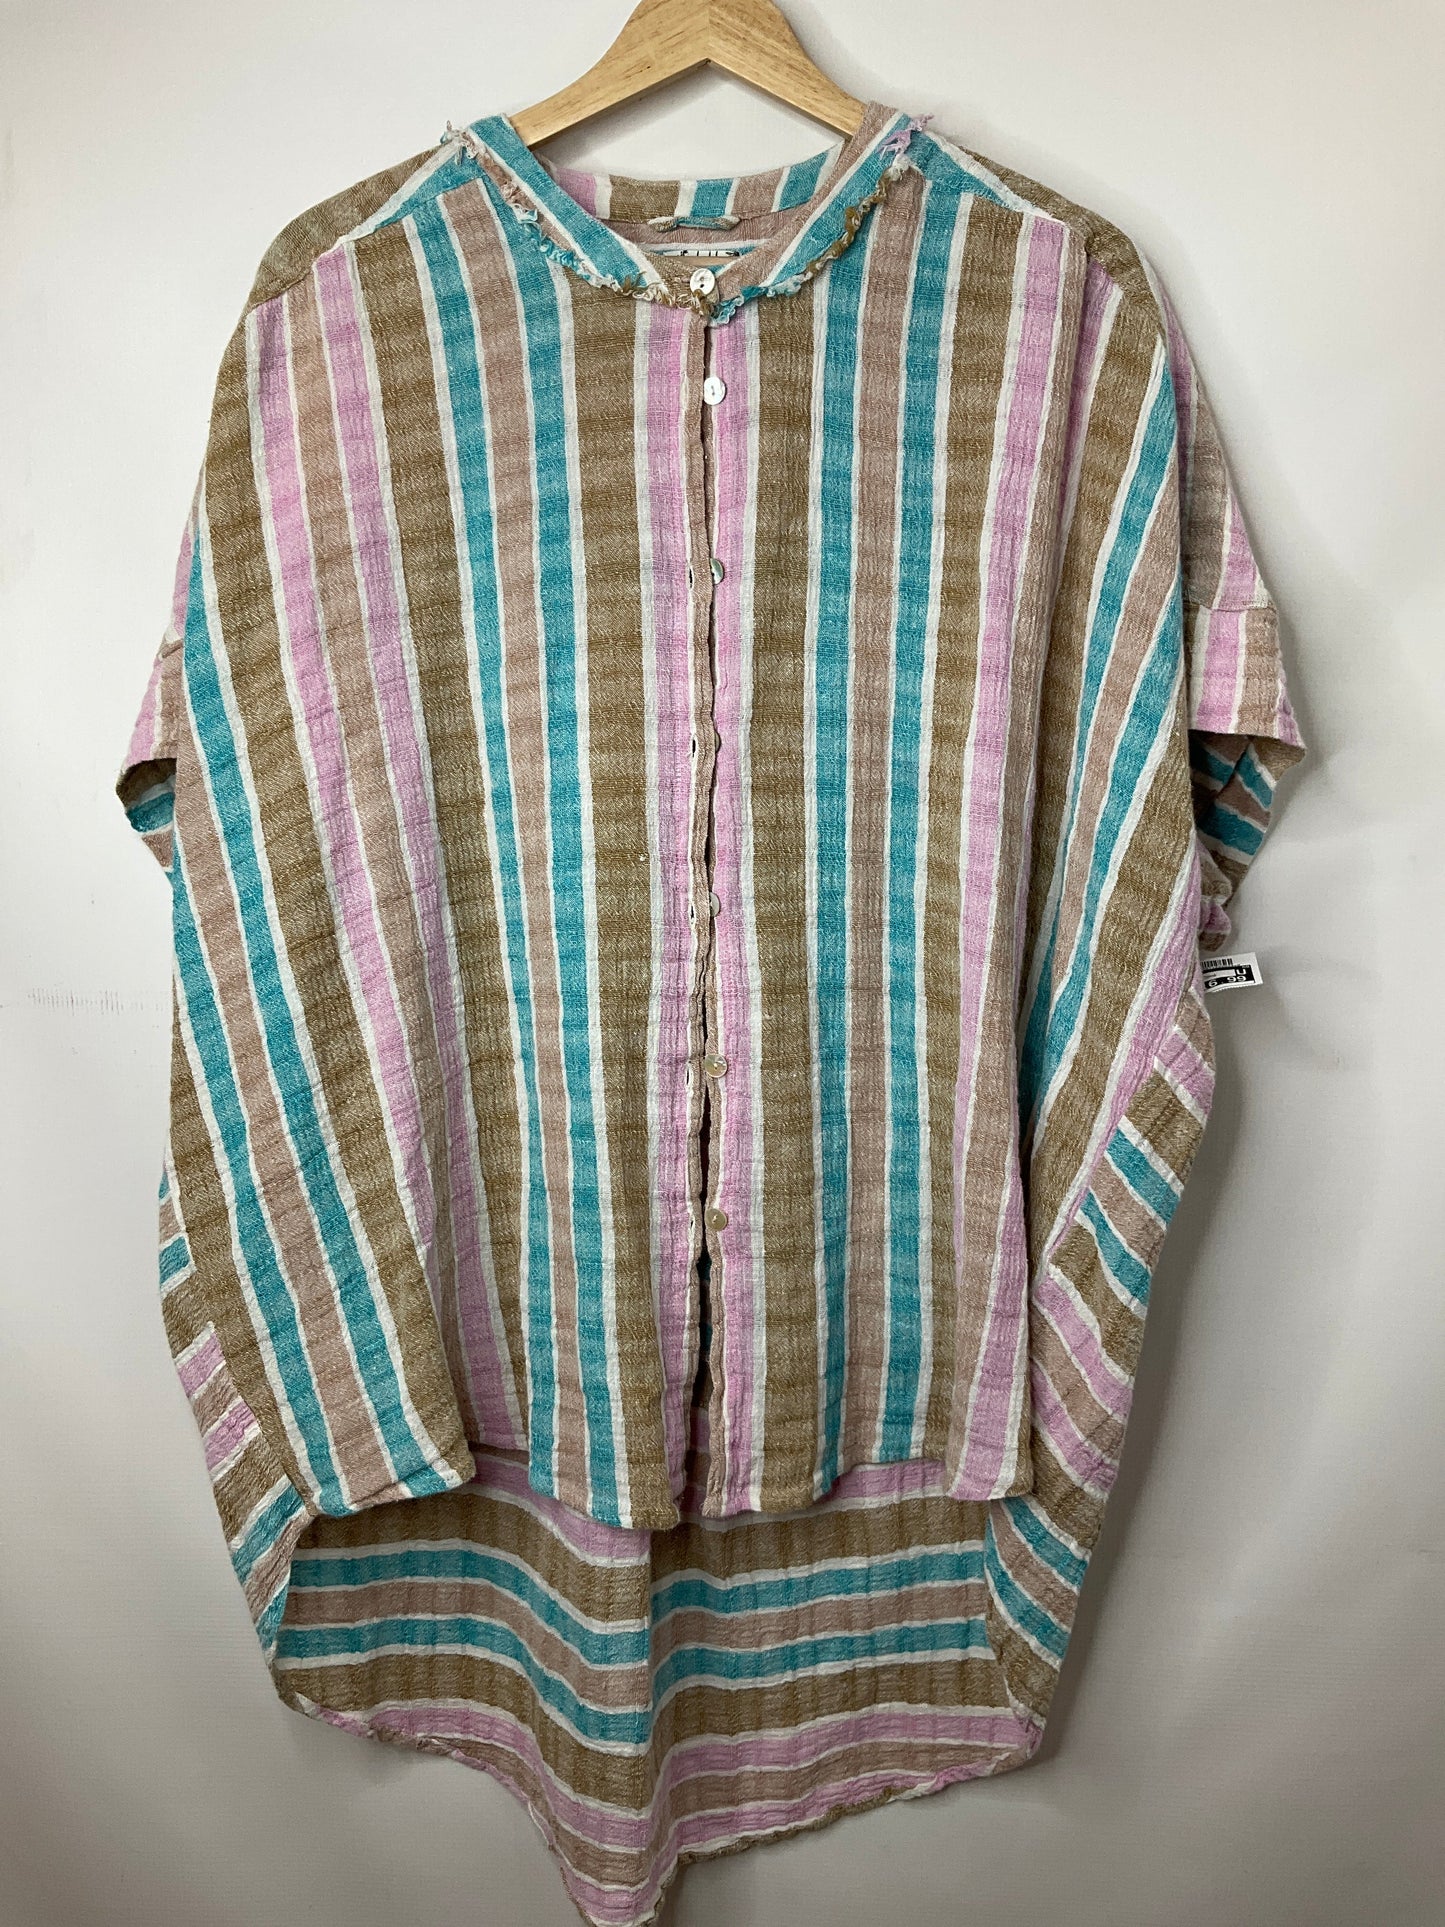 Striped Tunic Short Sleeve Free People, Size S